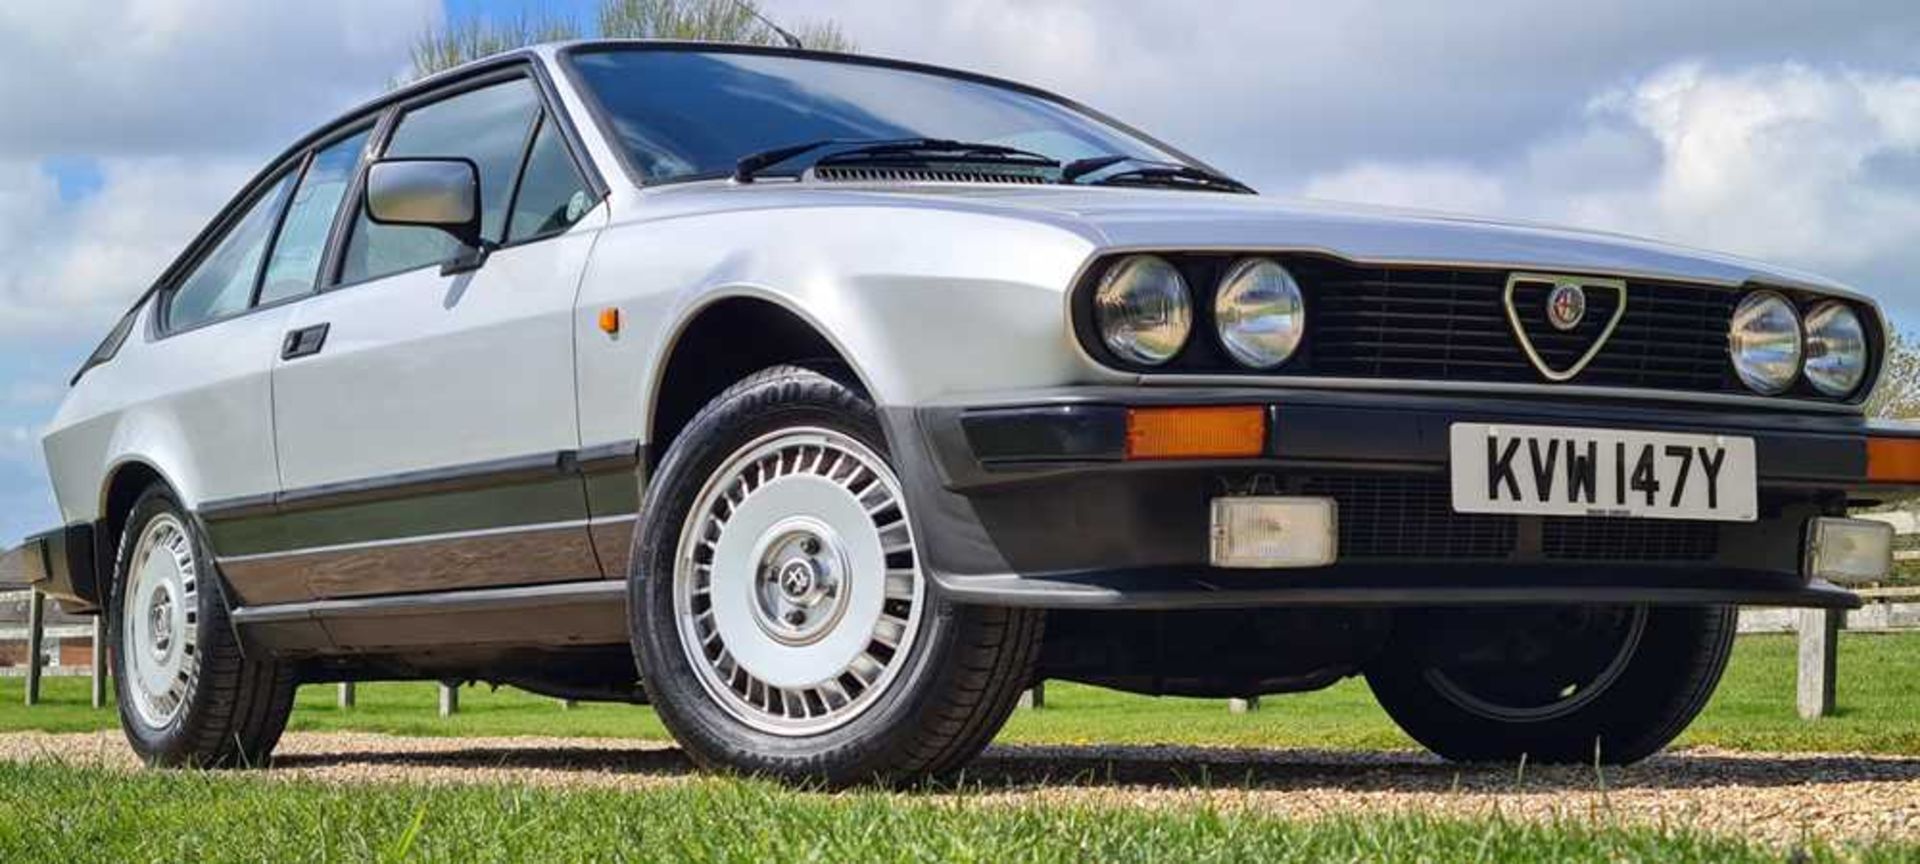 1983 Alfa Romeo GTV 2.0 litre Single family ownership and 48,000 miles from new - Image 6 of 51